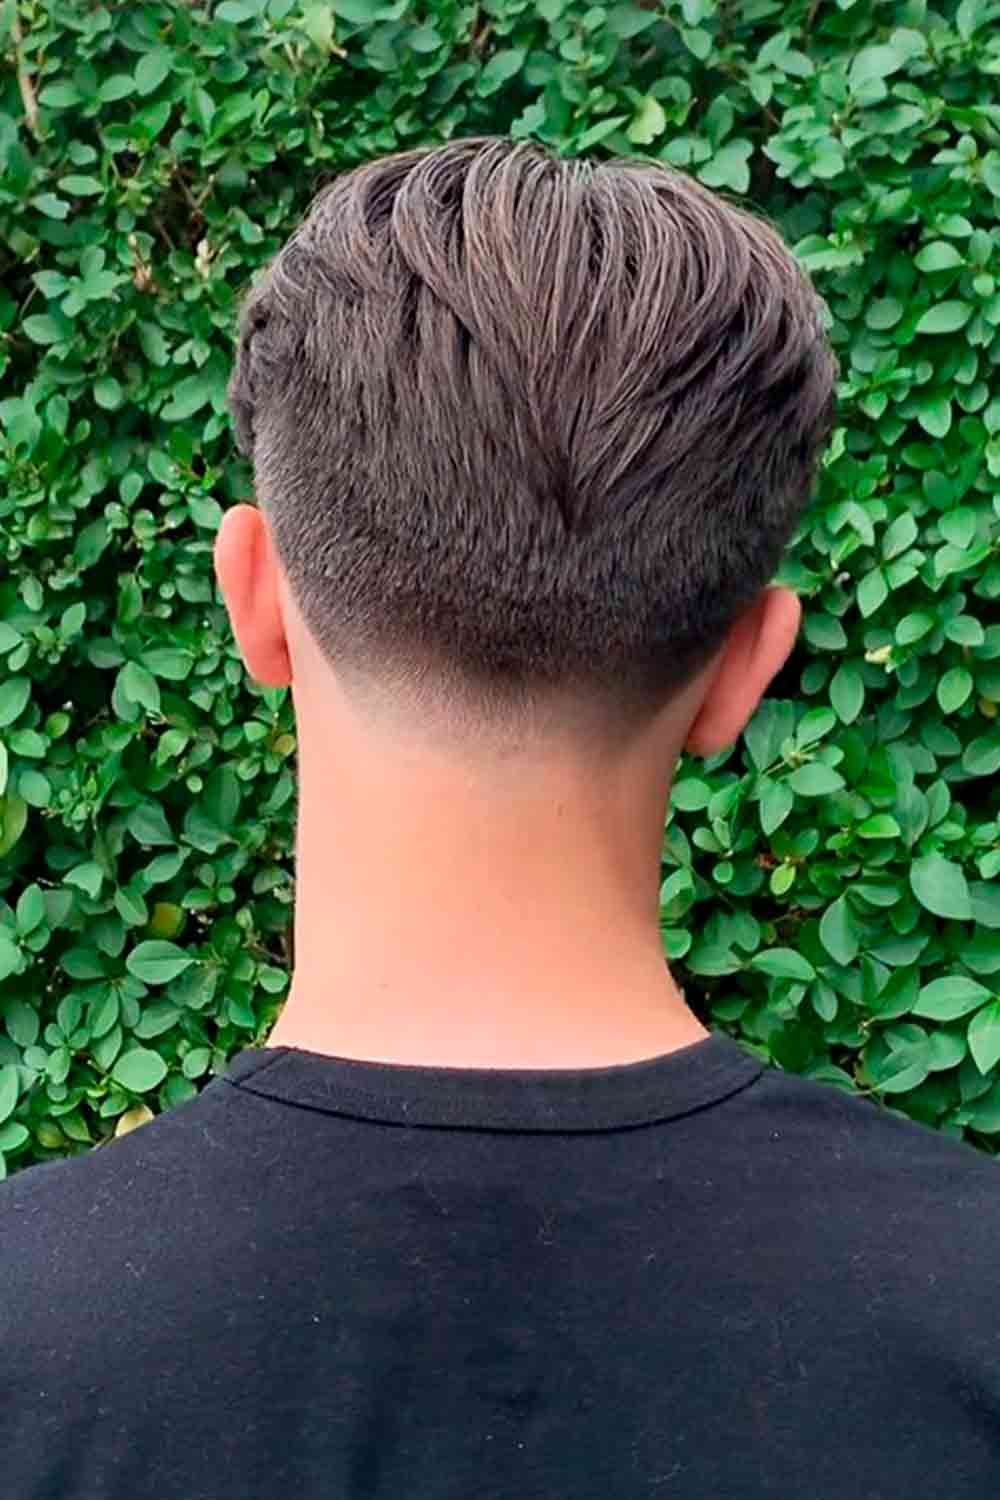 Middle Part Taper #taper #taperhaircut #taperedhaircut